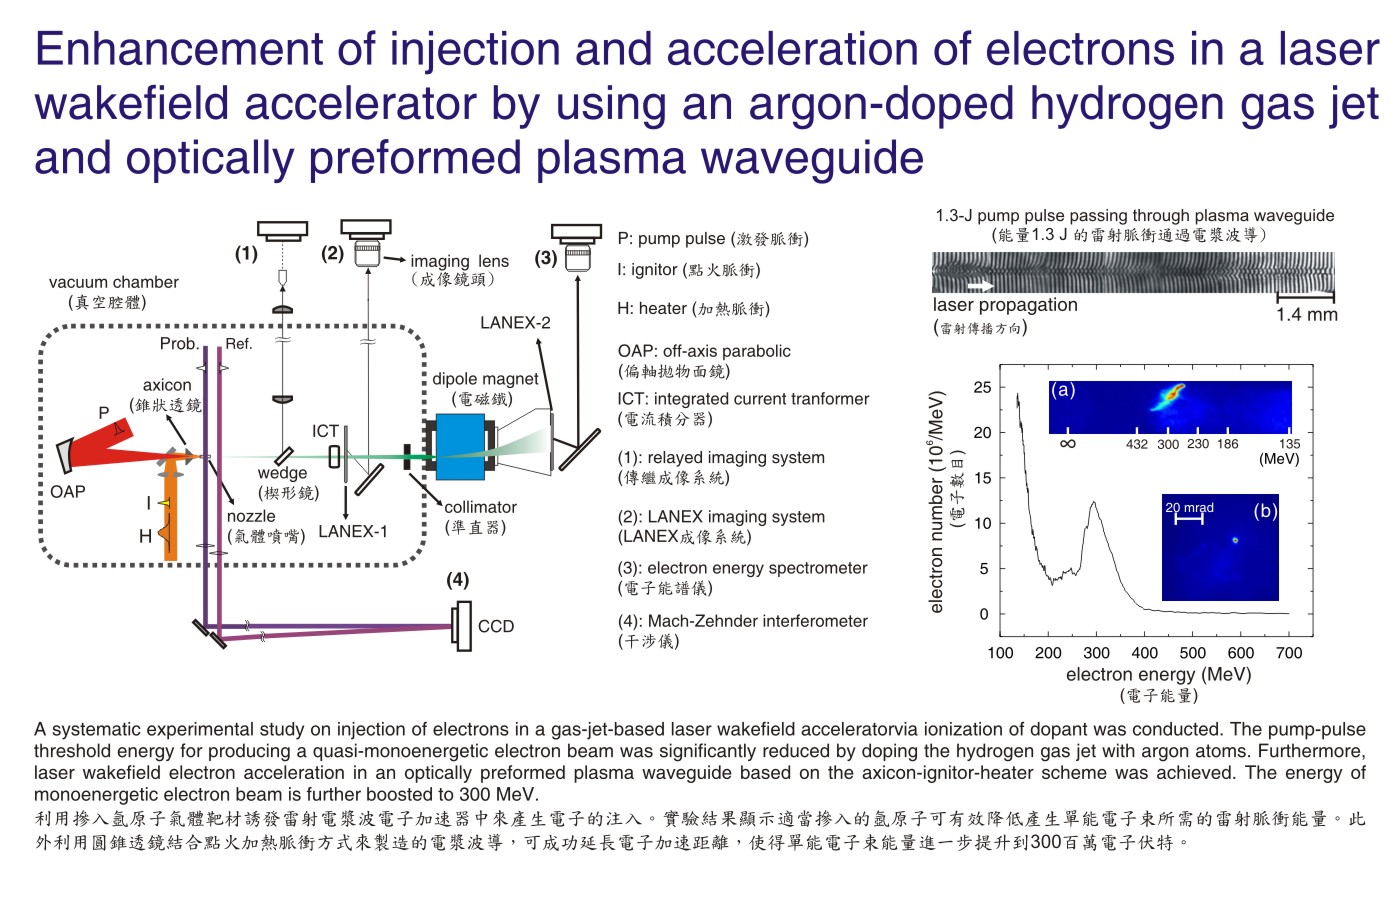 Enhancement of injection and acceleration of electrons in a laser wakefield accelerator by using an argon-doped hydrogen gas jet and optically preformed plasma waveguide